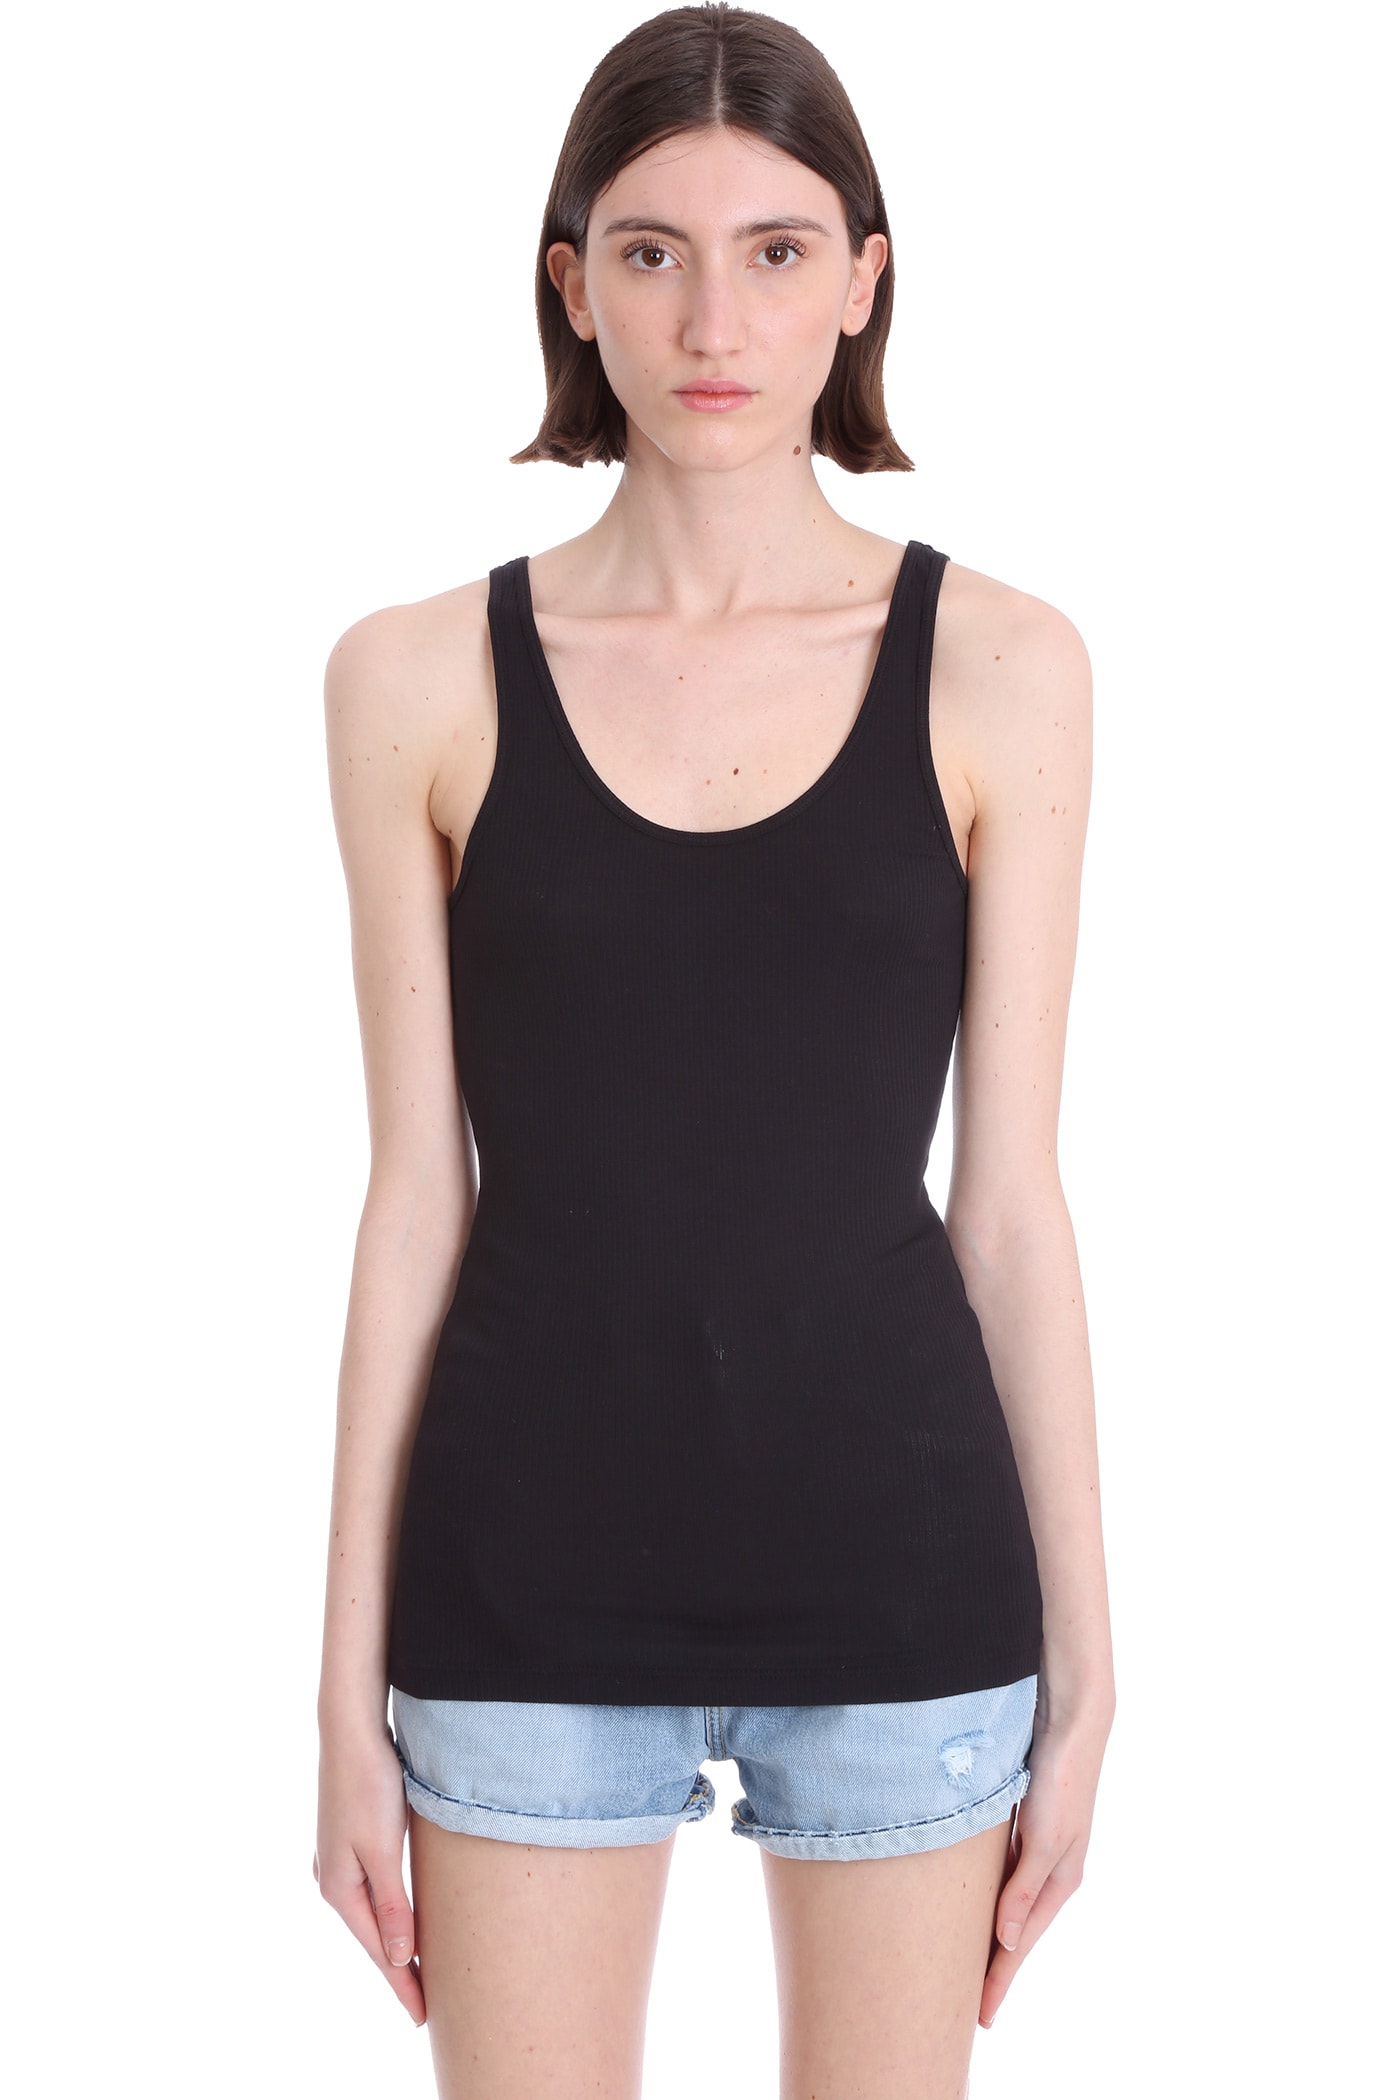 JAMES PERSE TOPWEAR IN BLACK COTTON,WNL3102